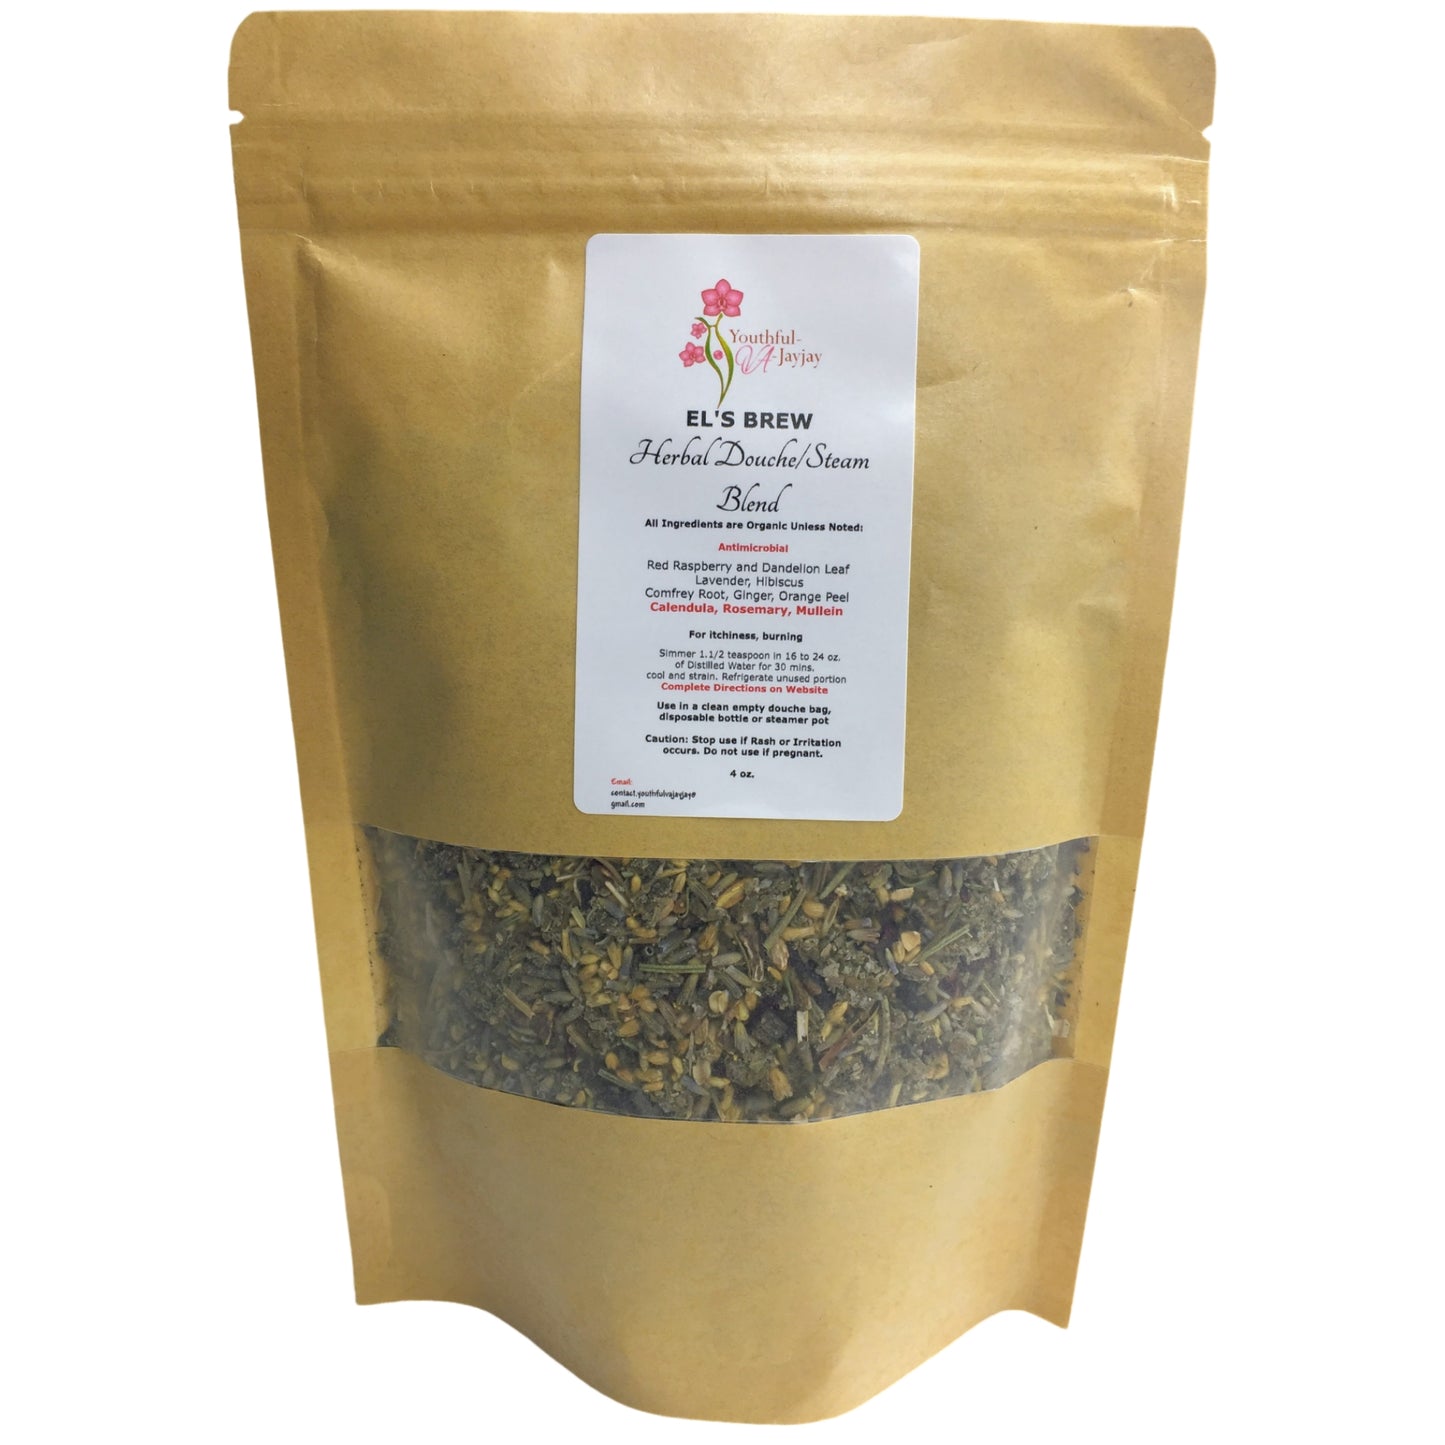 EL'S BREW- Organic Herbal Steam/Douche Blend, Handcrafted ANTIMICROBIAL USE, 4oz.